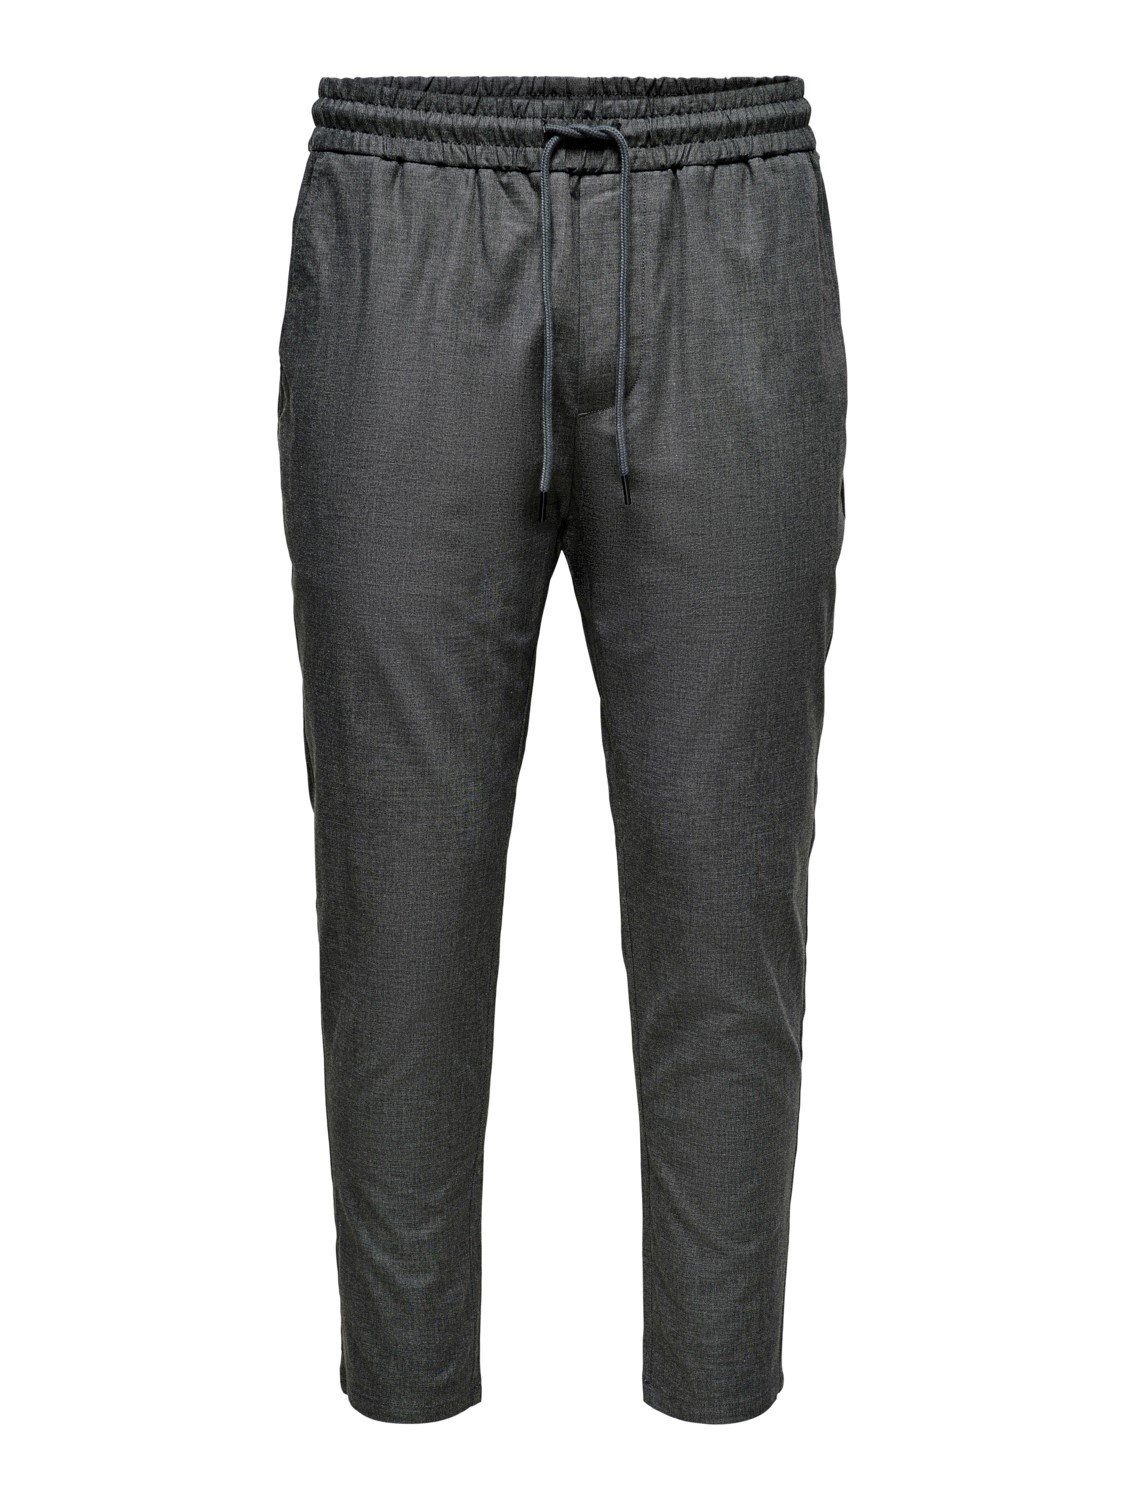 Chino Dunkelgrau Stoffhose Stoffhose 3972 Bequem & SONS Relaxed (1-tlg) Tunnelzug in Freizeit ONSLINUS Pants ONLY